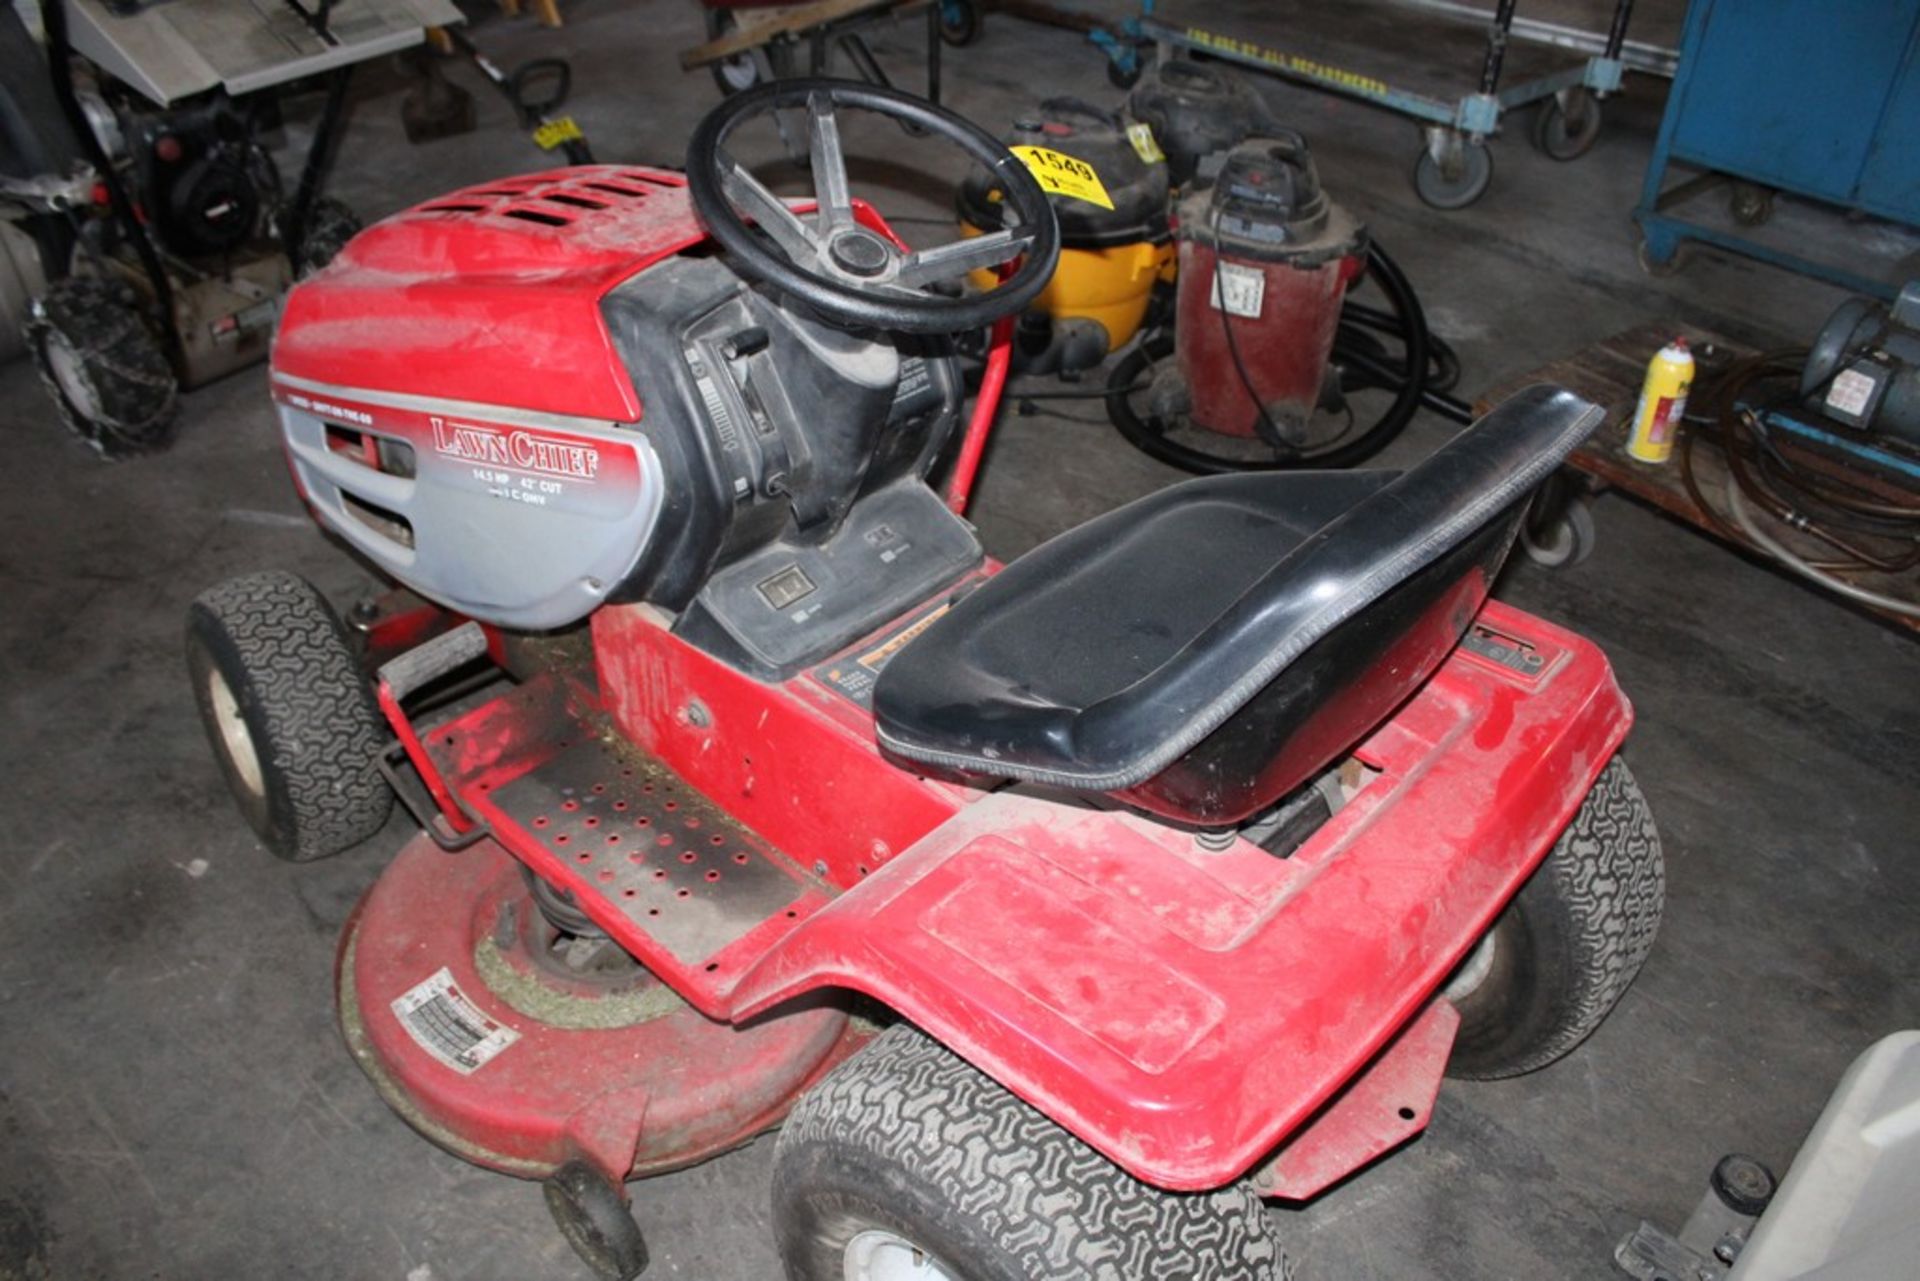 LAWN CHIEF 42" RIDING LAWN MOWER WITH BRIGGS & STRATTON 14.5 HP GAS ENGINE, 7 SPEED, SHIFT ON THE GO - Image 4 of 6